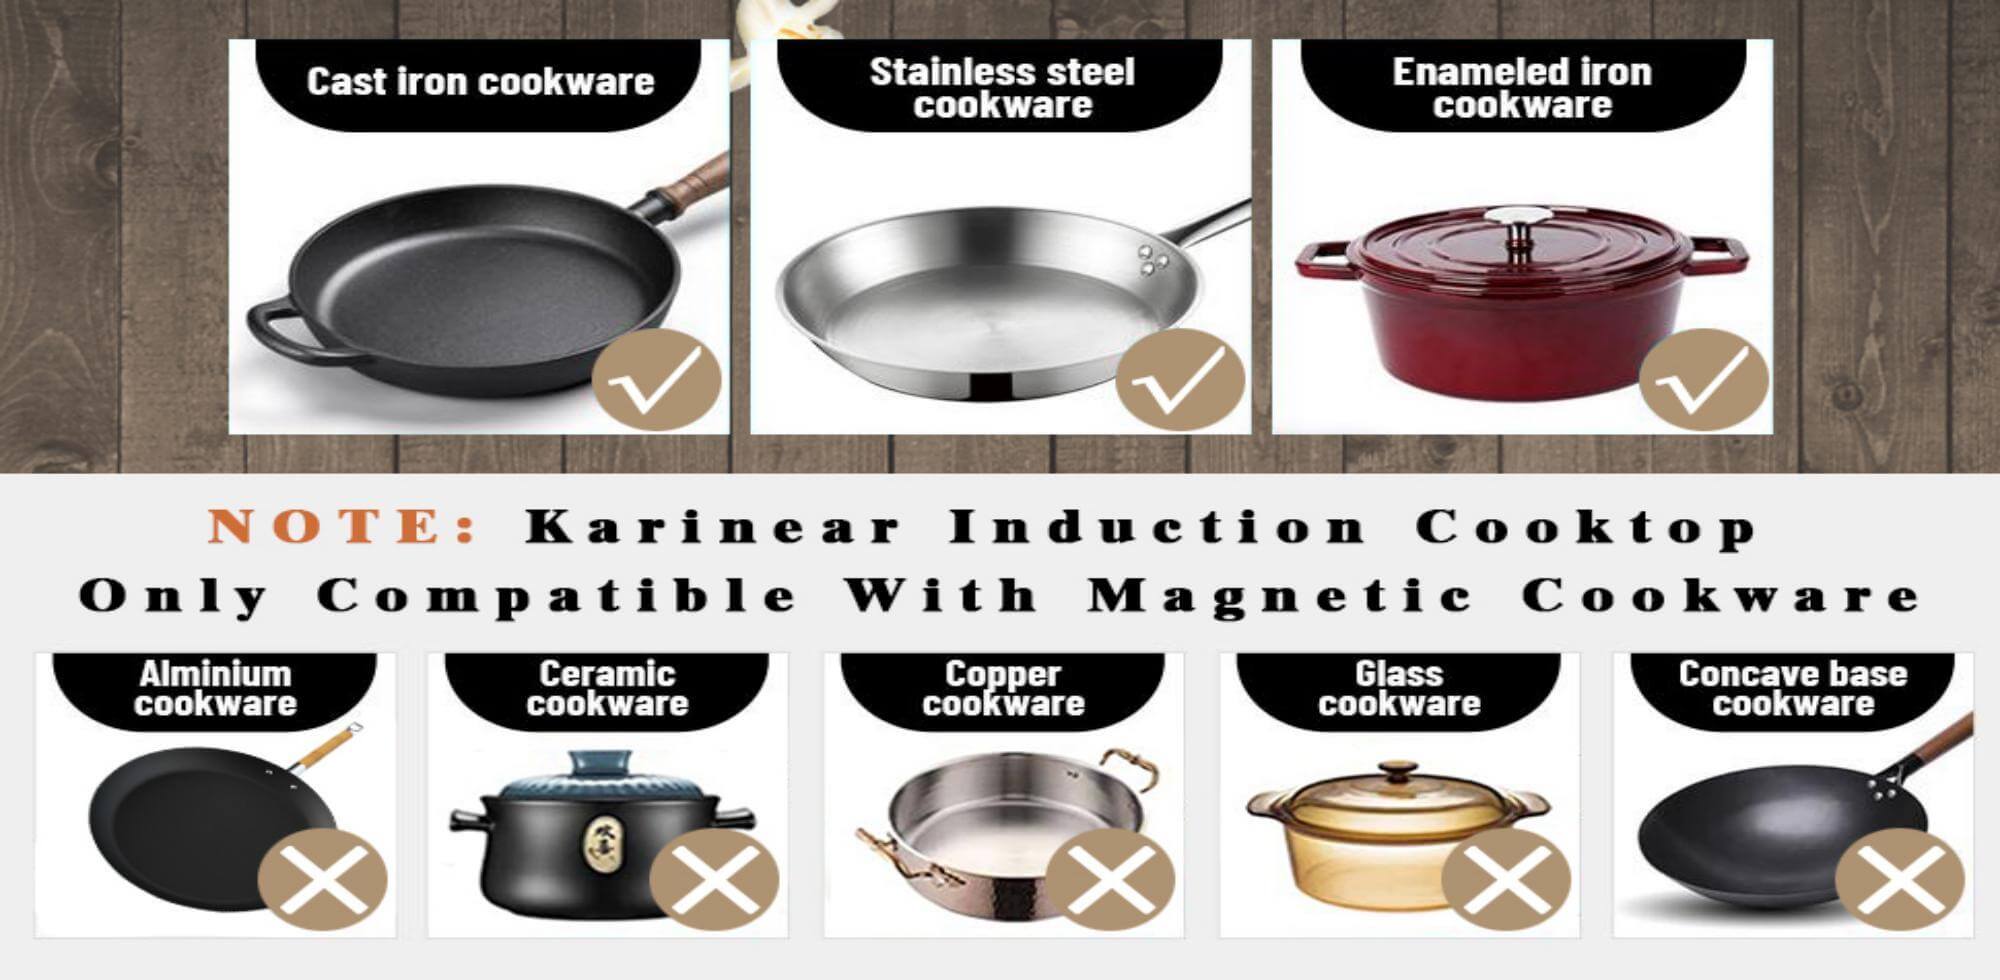 cookware for karinear induction cooktop